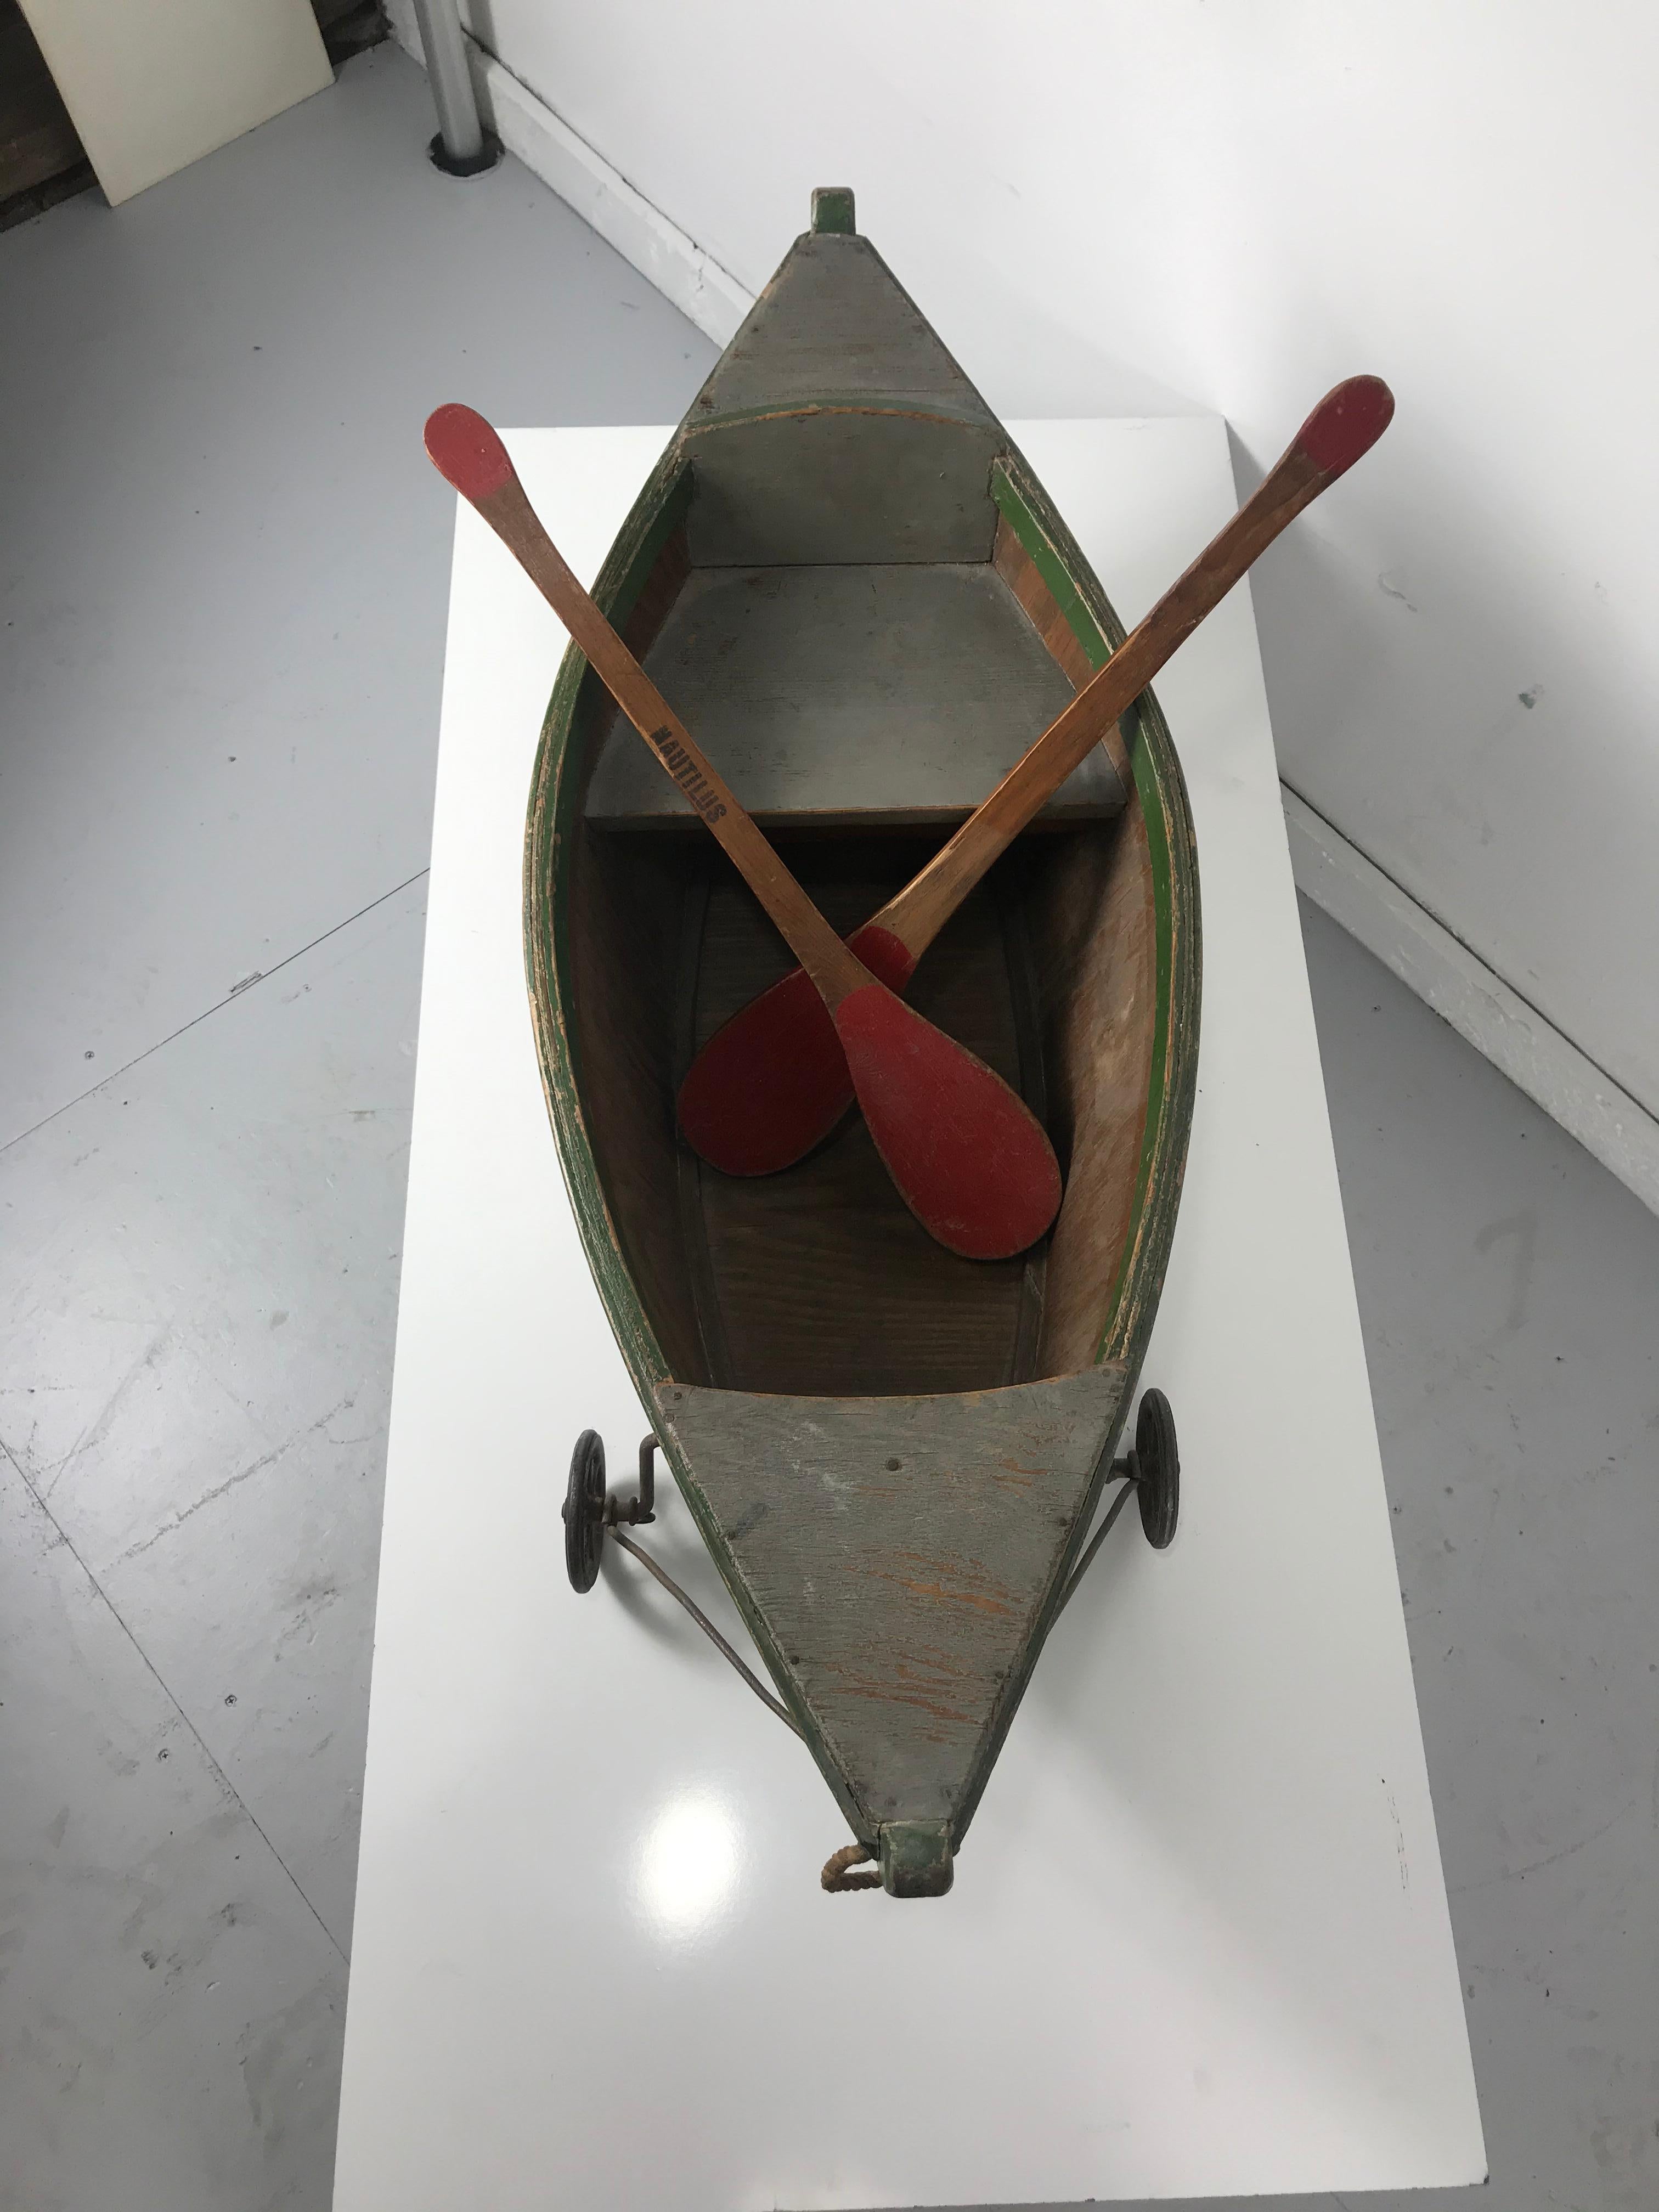 Rare antique wooden child's ride on wooden toy boat by Nautilus Toy Co. London wonderful Folk Art object. 1920s ride on toy made by the Nautilus Toy Company, all wood construction, beautiful original paint and surface, retains its original oars also